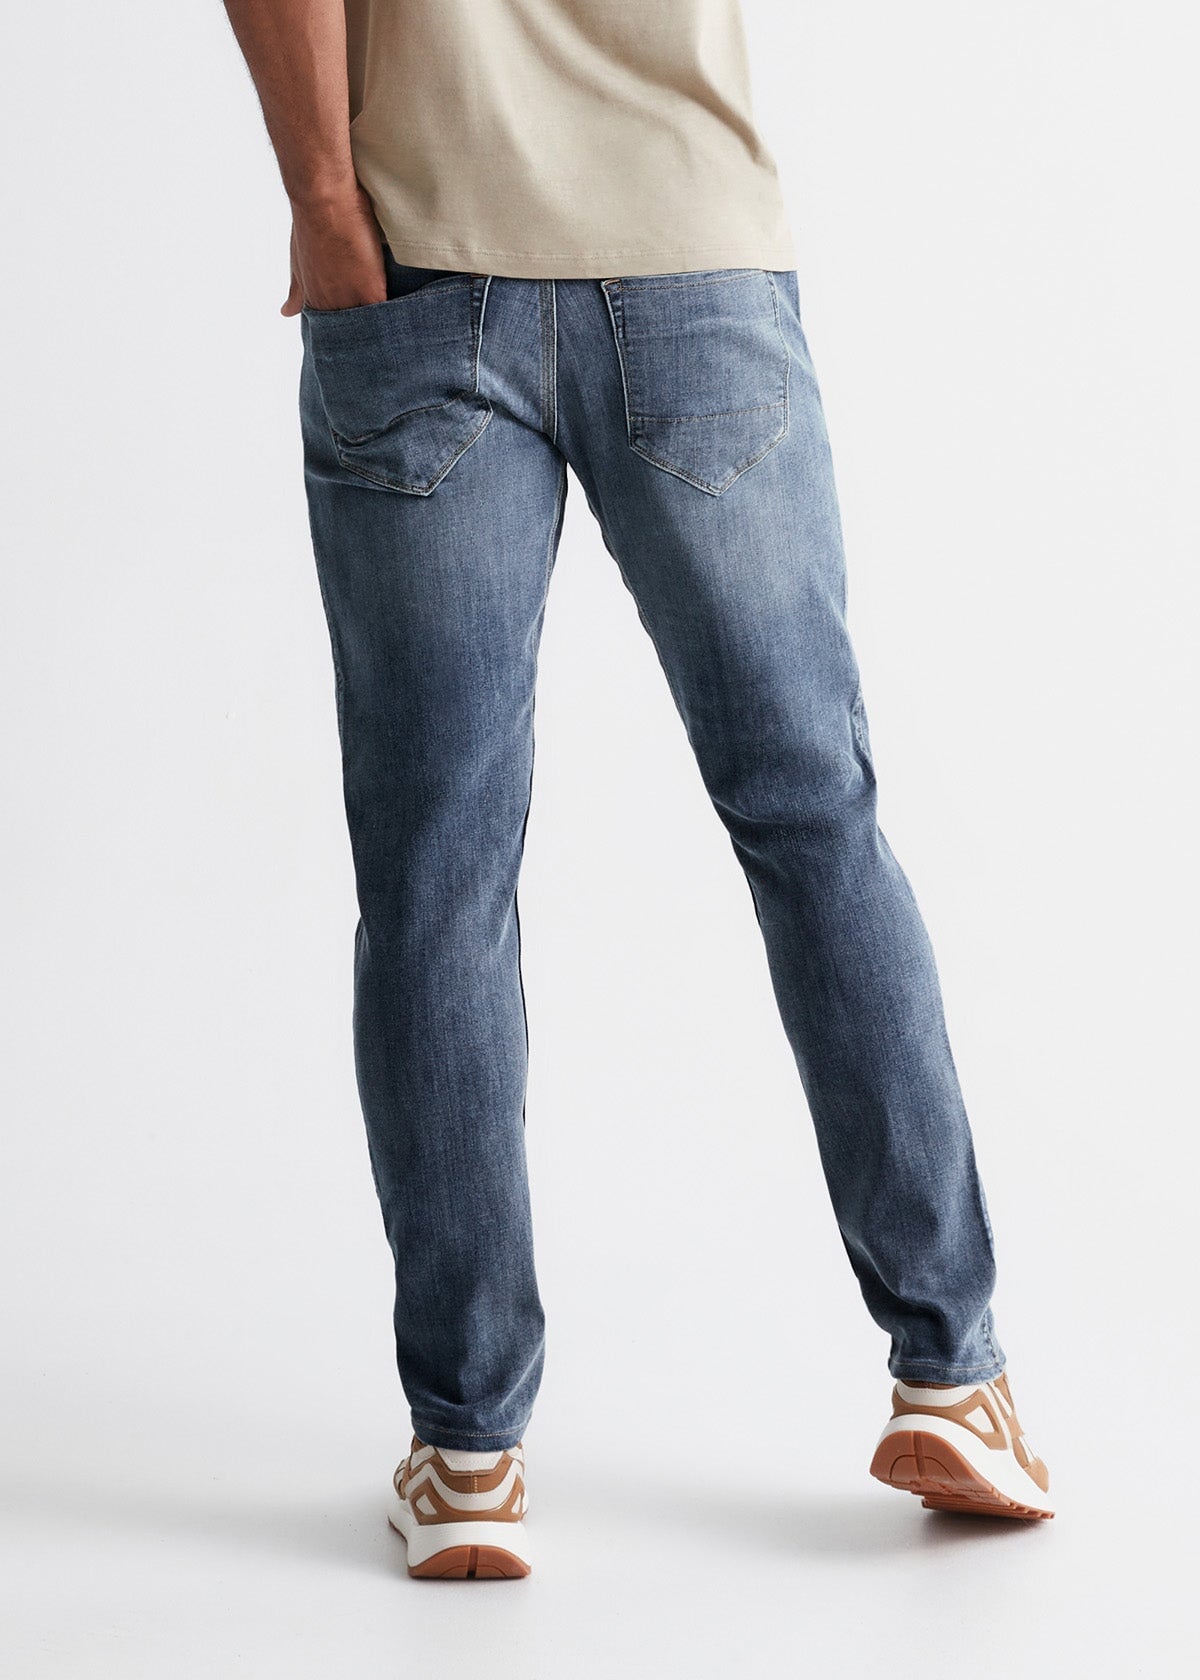 Men's Faded Blue Slim Fit Stretch Jeans